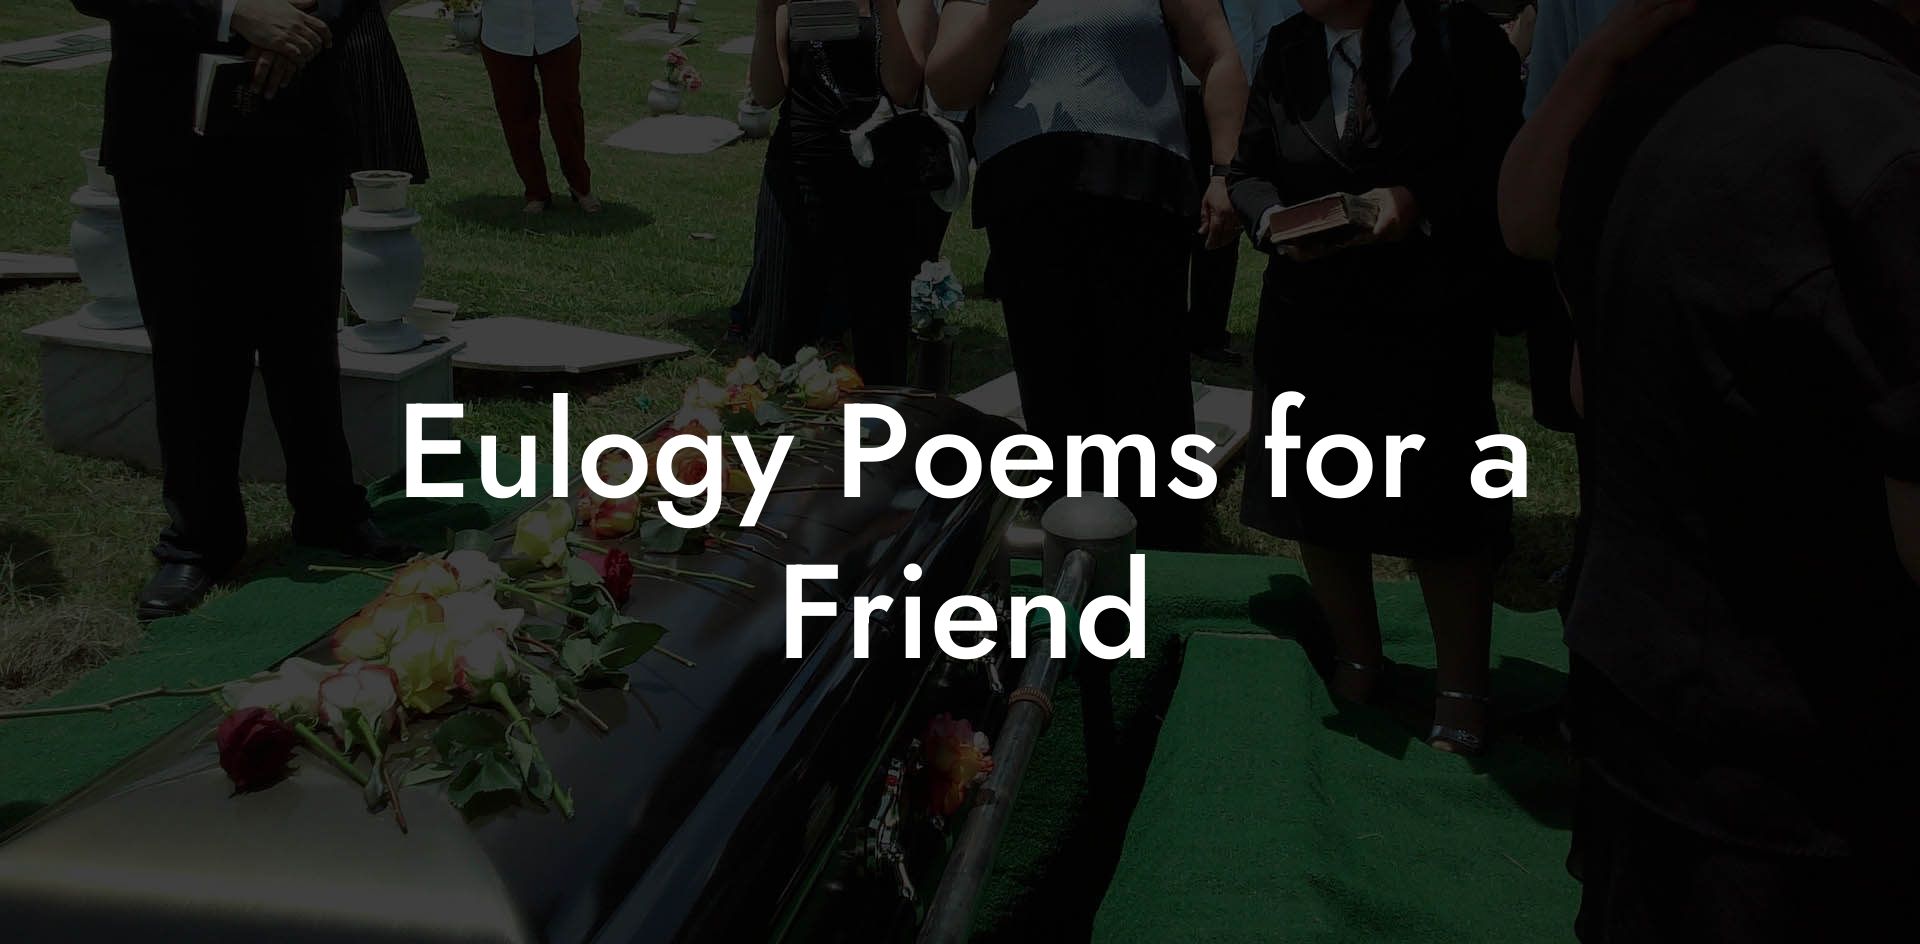 Eulogy Poems for a Friend